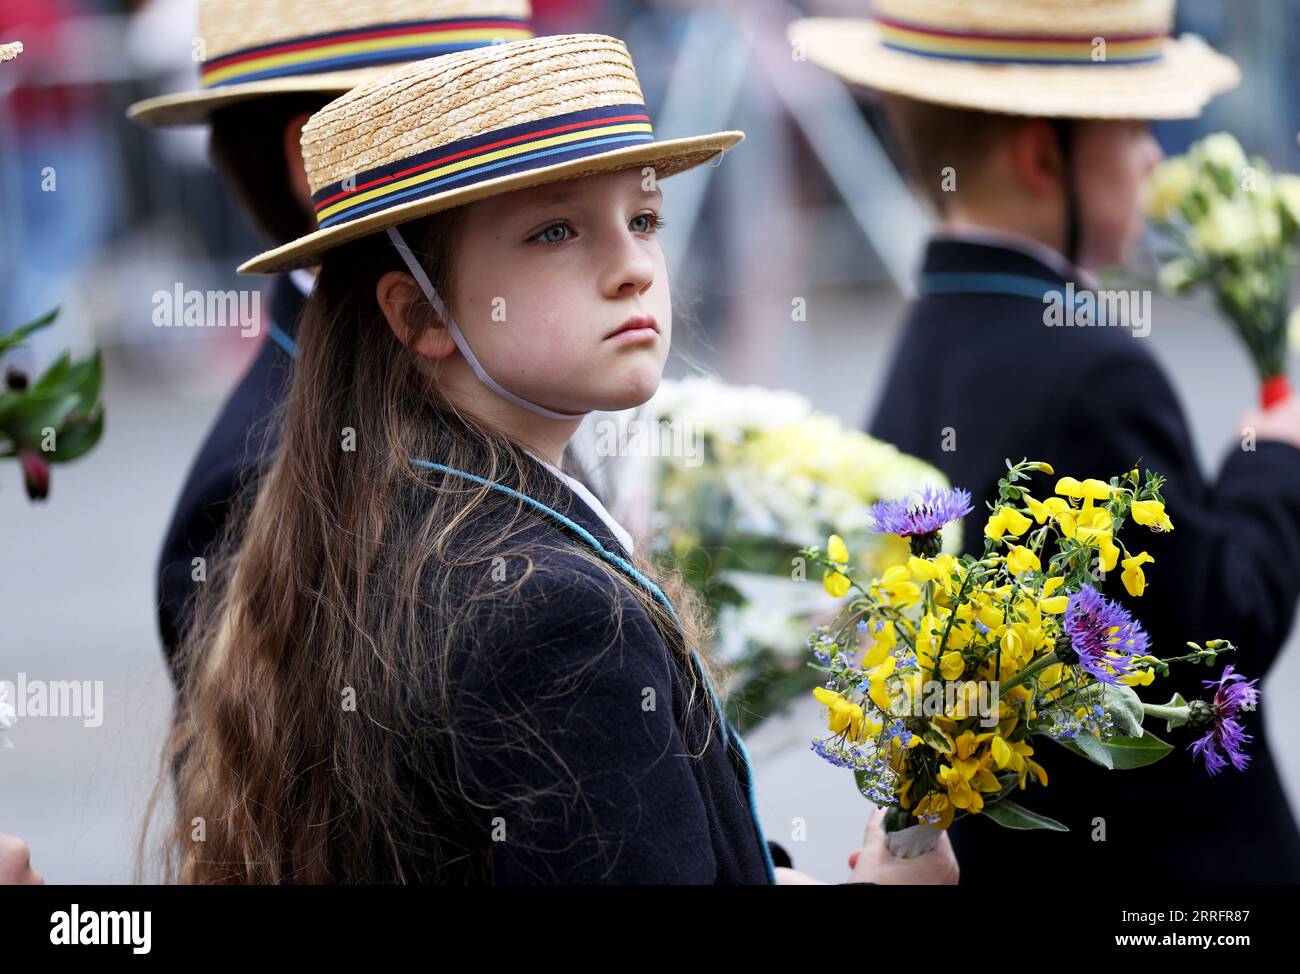 220424 -- STRATFORD UPON AVON, April 24, 2022 -- A girl attends a parade in celebration of William Shakespeare s 458th birthday in Stratford-upon-Avon, Britain, April 23, 2022. Over 1,000 people gathered at Stratford-upon-Avon, the hometown of William Shakespeare, to celebrate the British playwright s 458th birthday on Saturday.  BRITAIN-STRATFORD UPON AVON-SHAKESPEARE-CELEBRATION LixYing PUBLICATIONxNOTxINxCHN Stock Photo